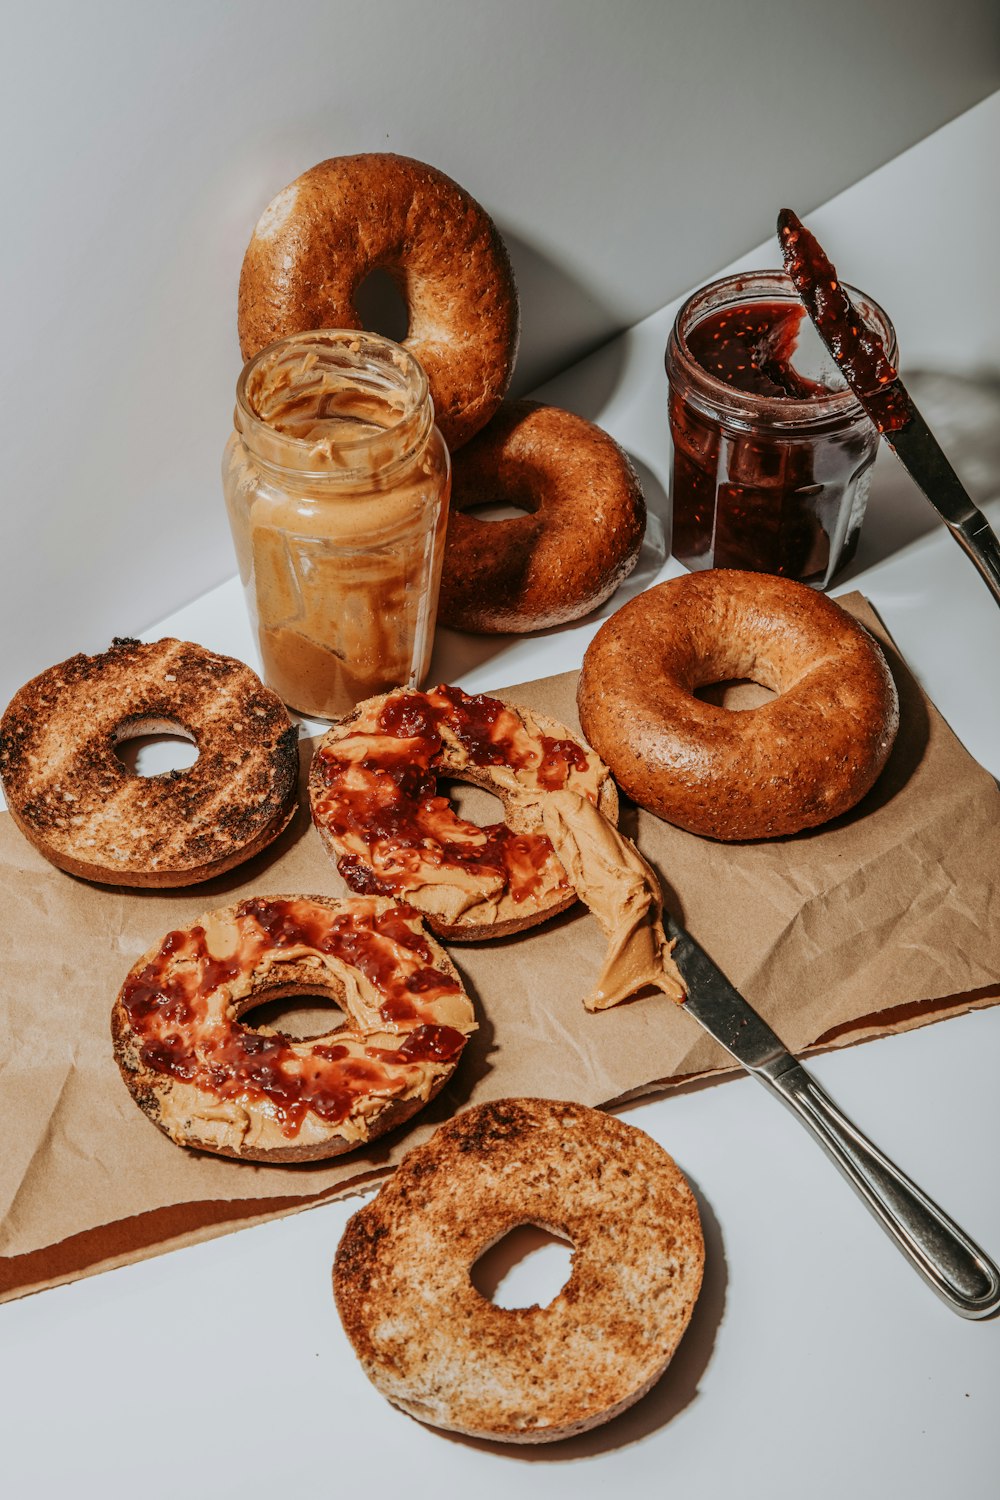 a table topped with donuts and pizzas next to a jar of peanut butter